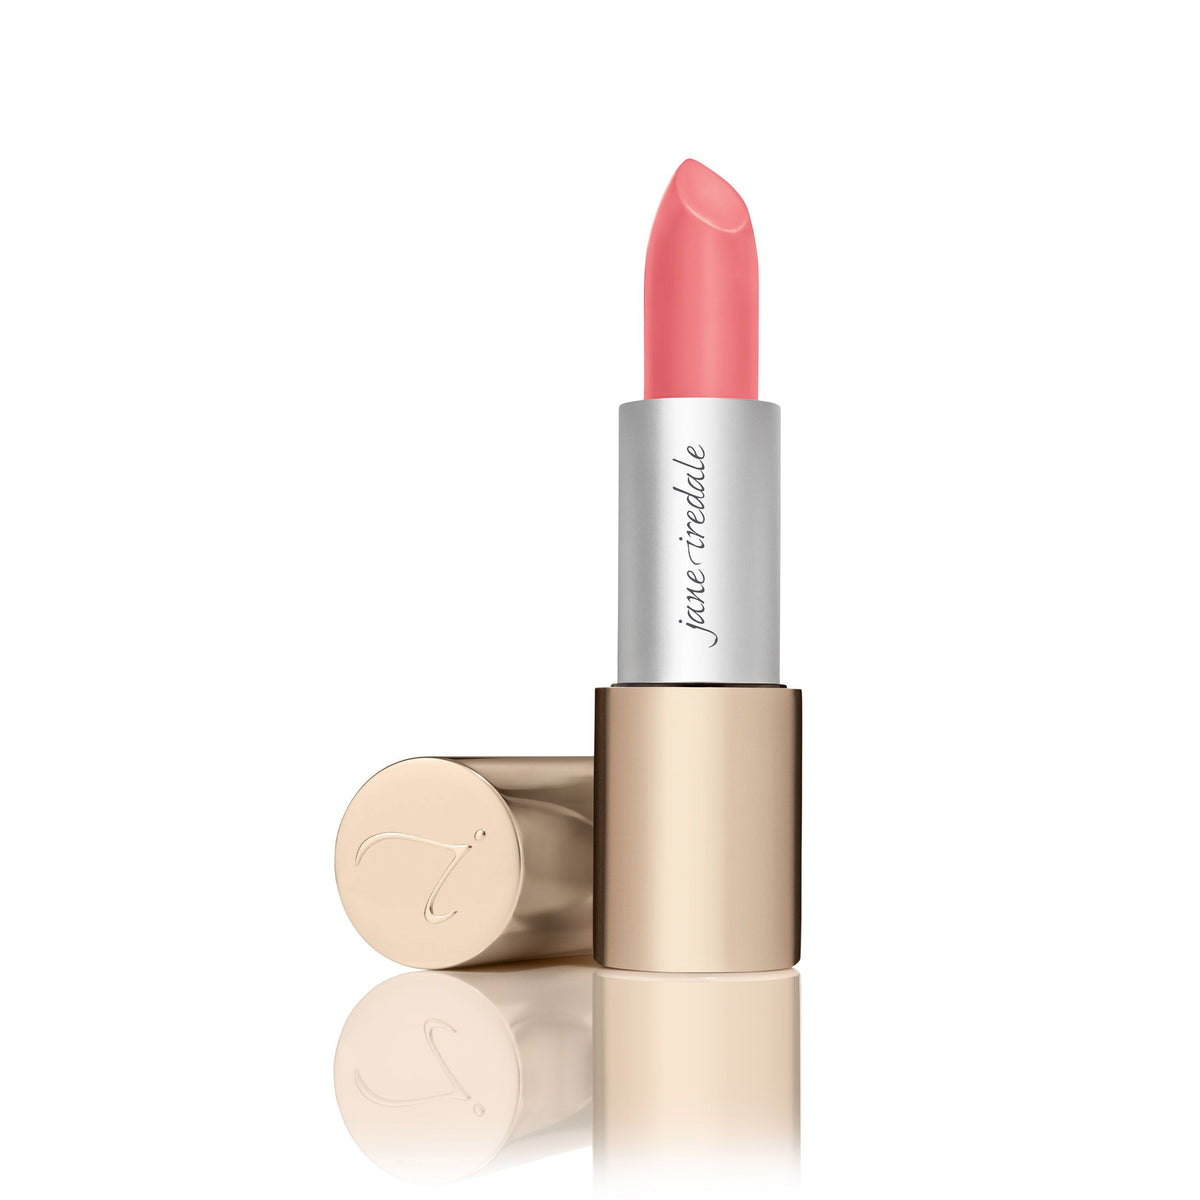 Triple Luxe™ Long Lasting Naturally Moist Lipstick view 1